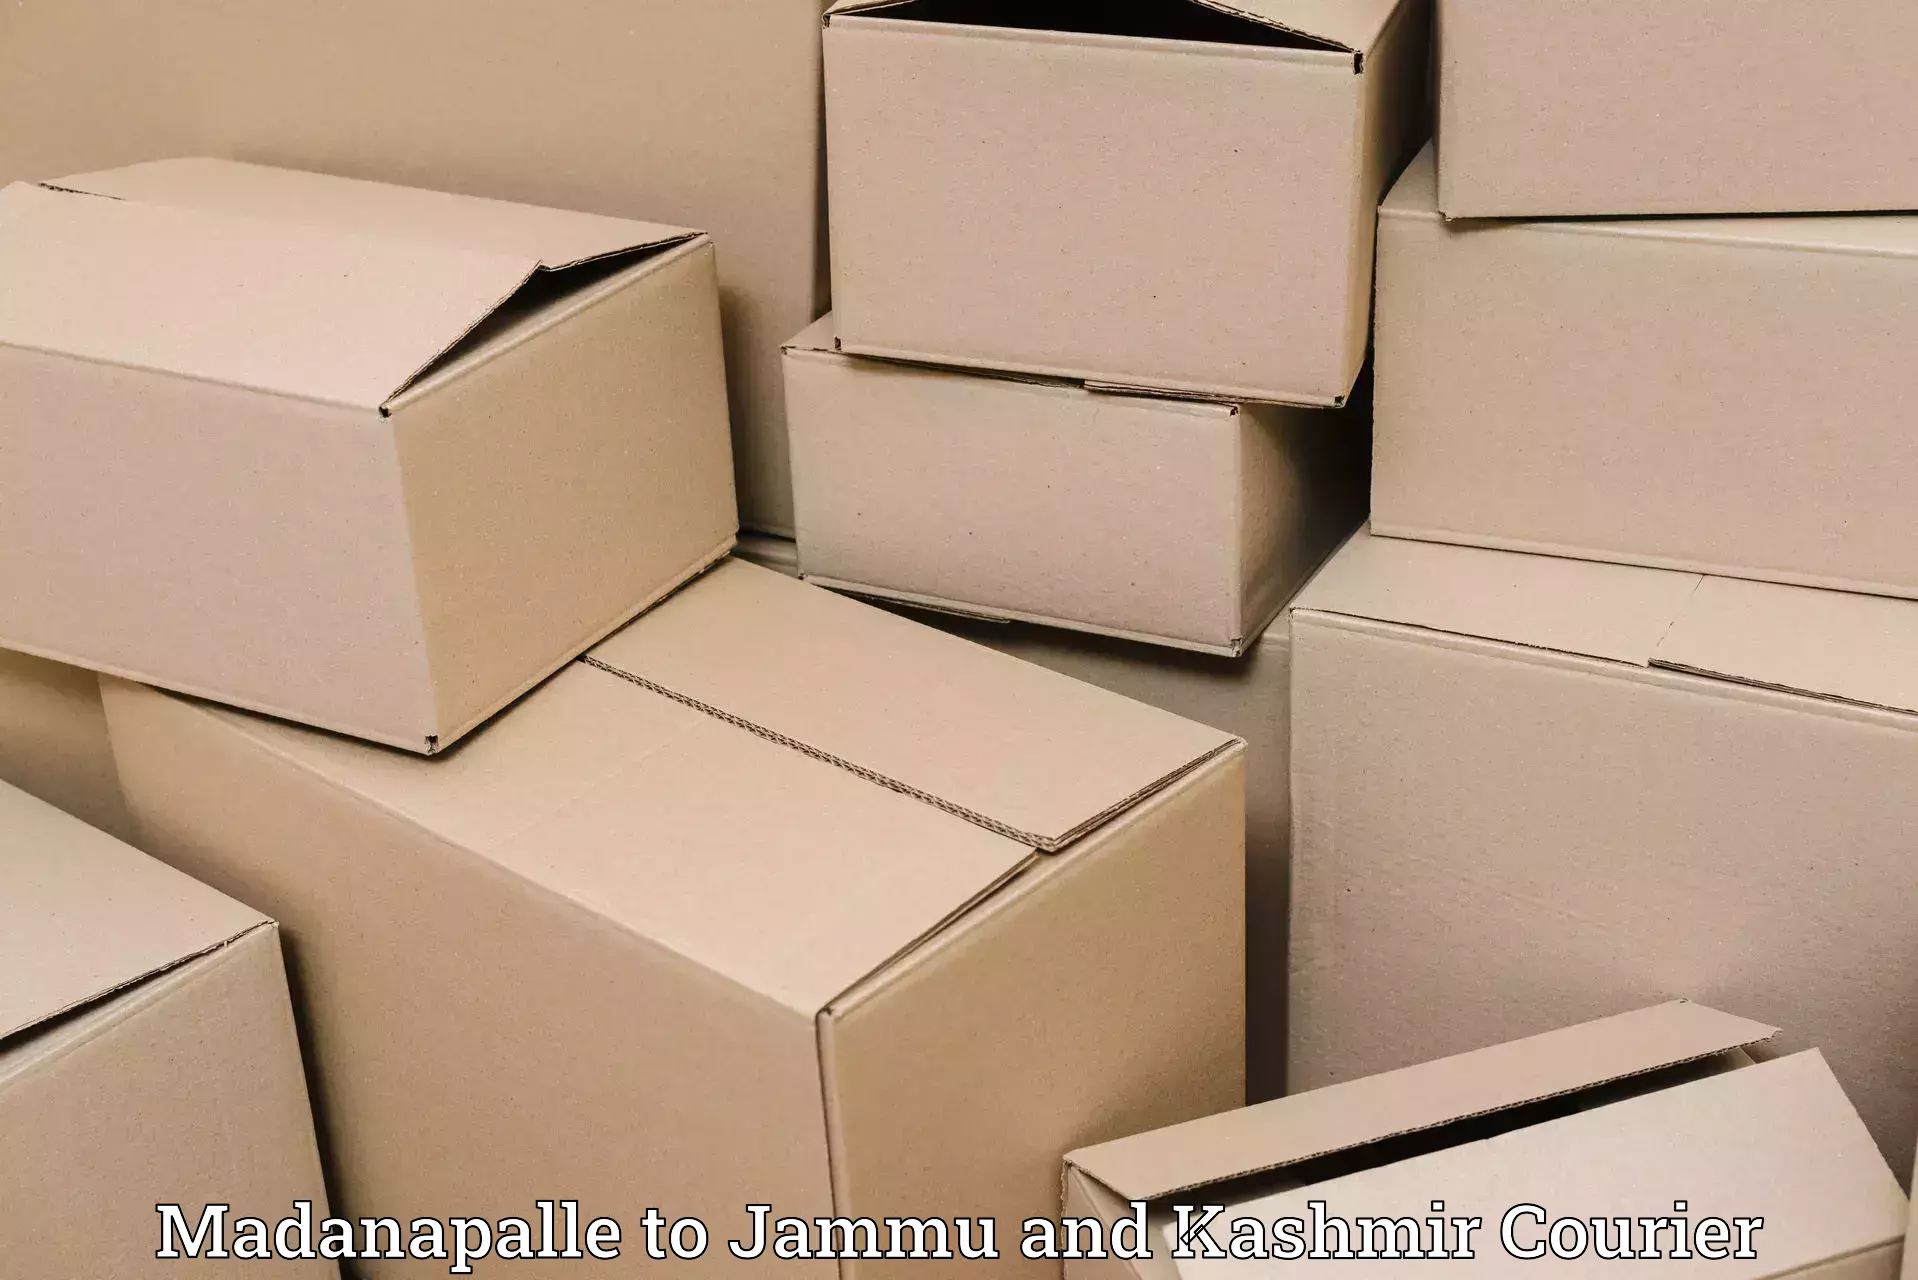 Efficient order fulfillment Madanapalle to Bandipur